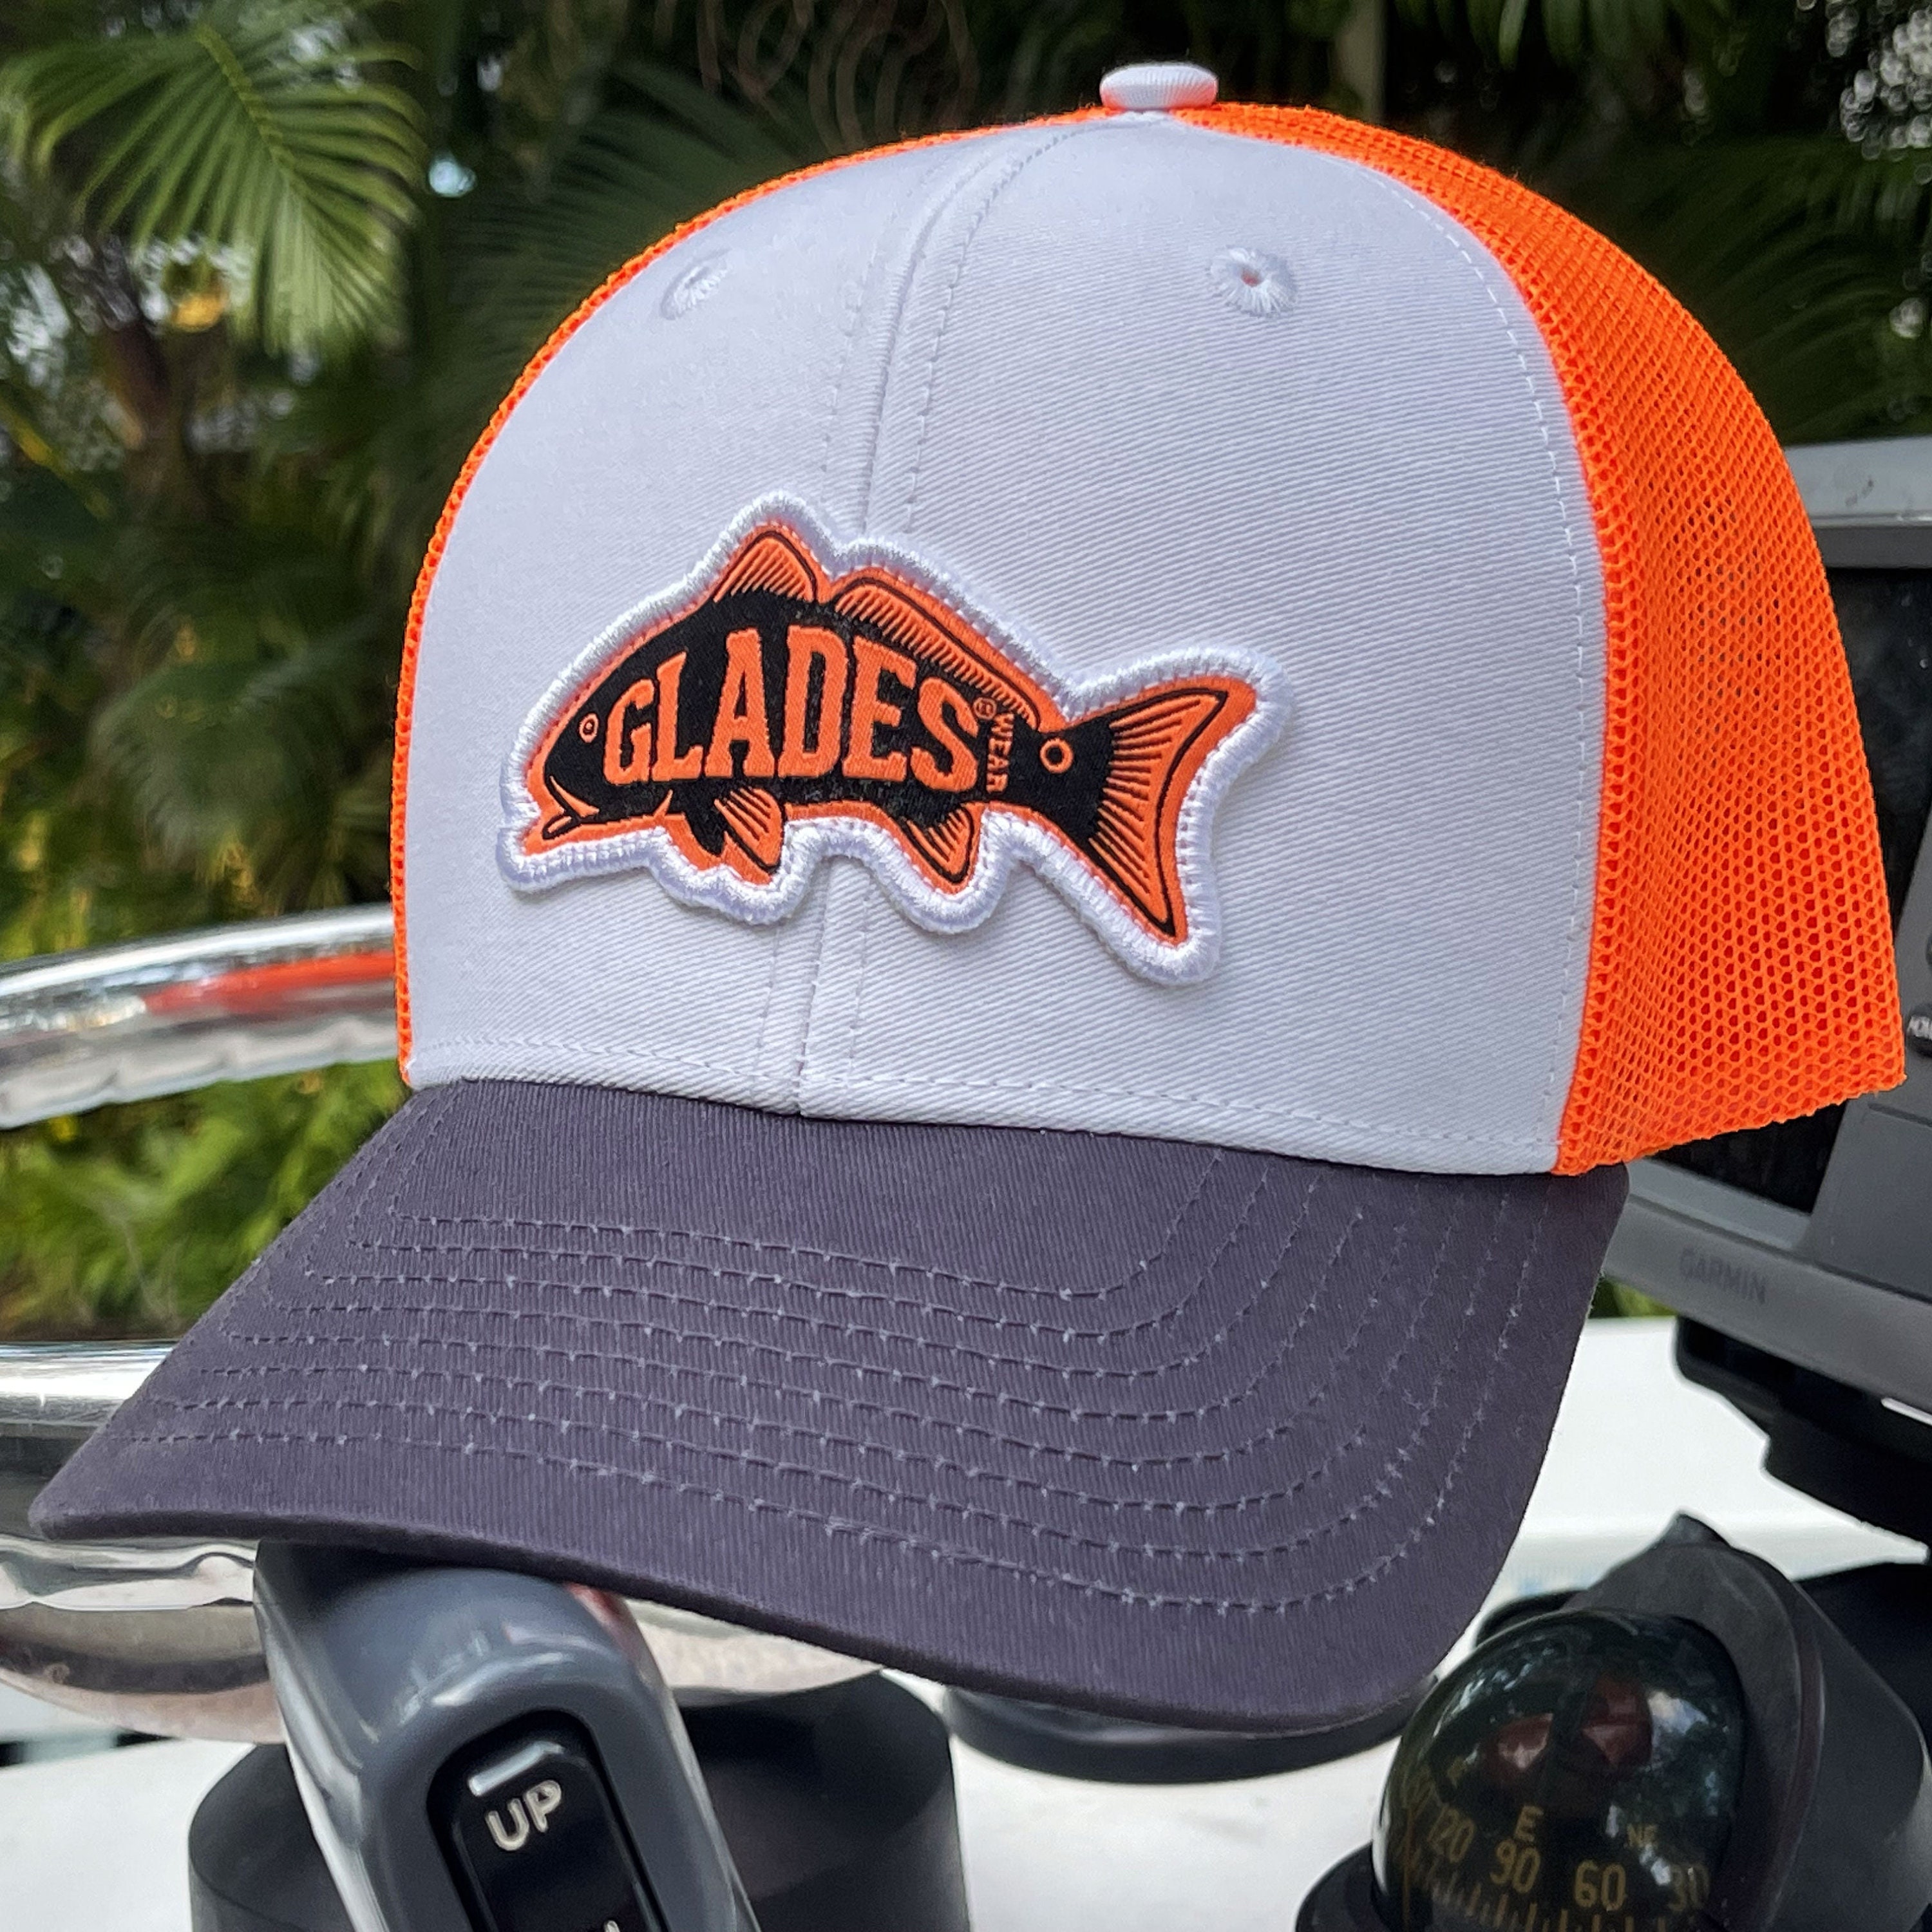 Redfish (Red Drum) Patch Mesh Snap Back Trucker Hat for Men Women - Unique Breathable Florida Fly Fishing Hunting Fishermen Gift